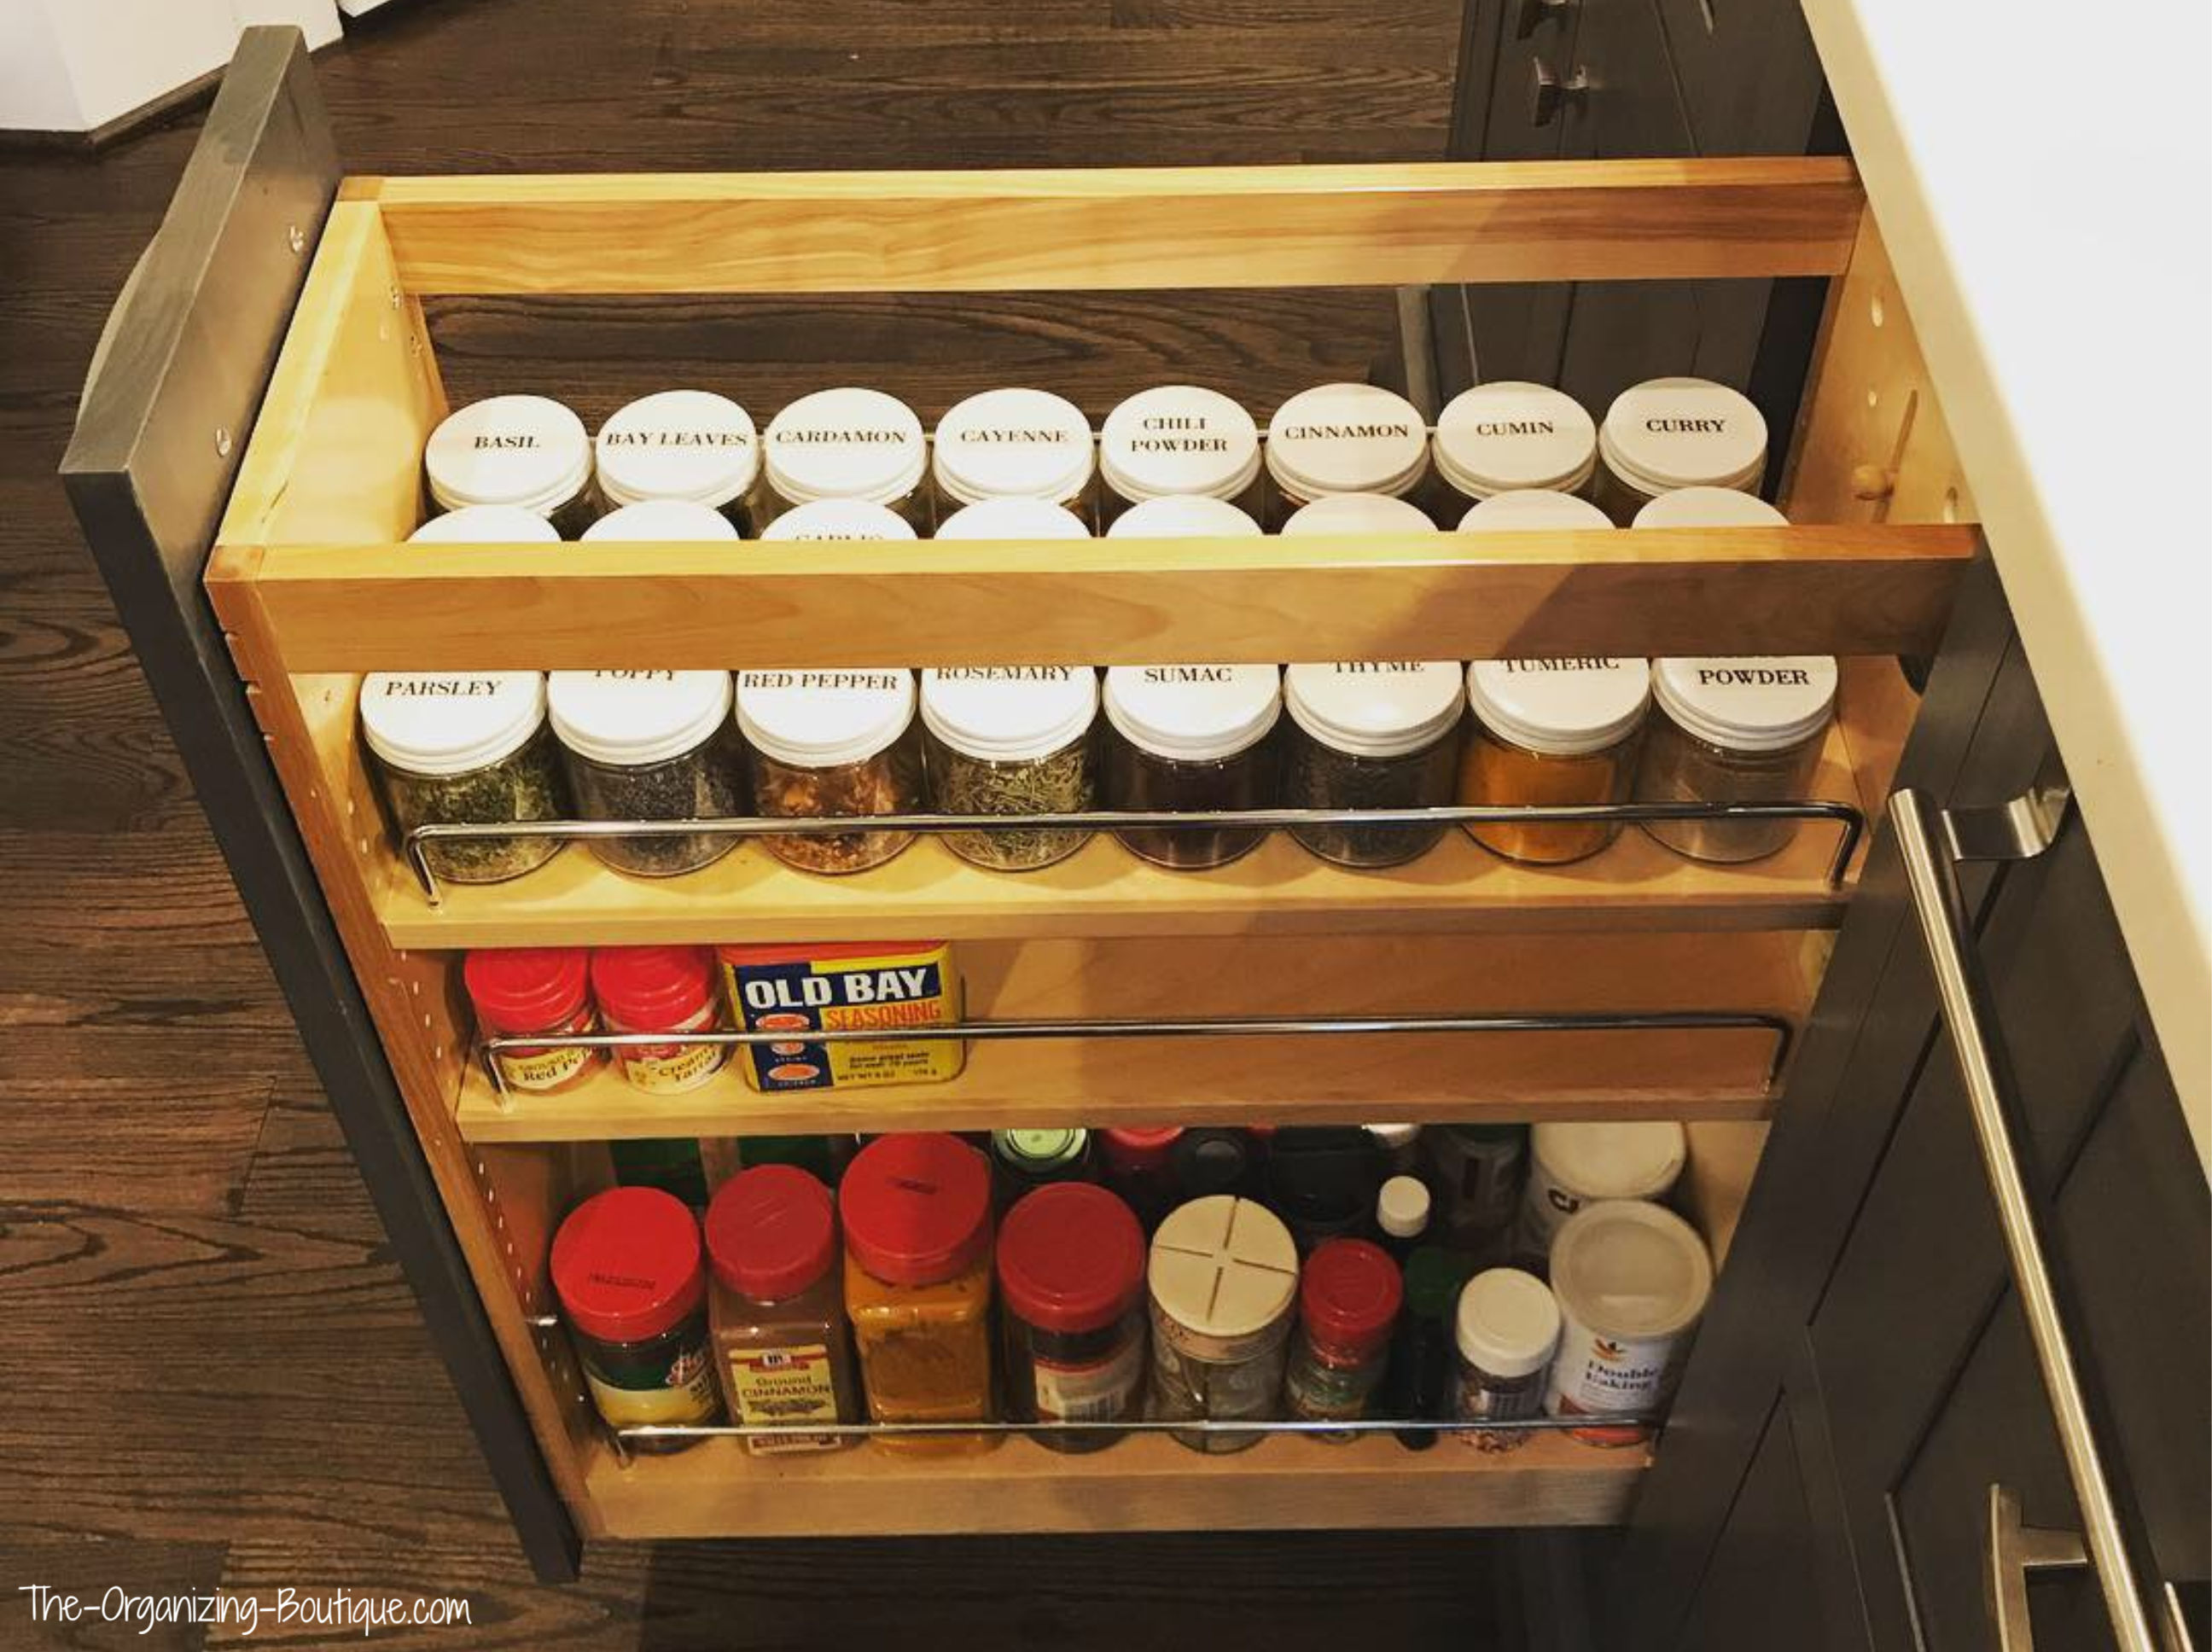 https://www.the-organizing-boutique.com/images/Drawer-Spice-Rack-Wm-2.jpg